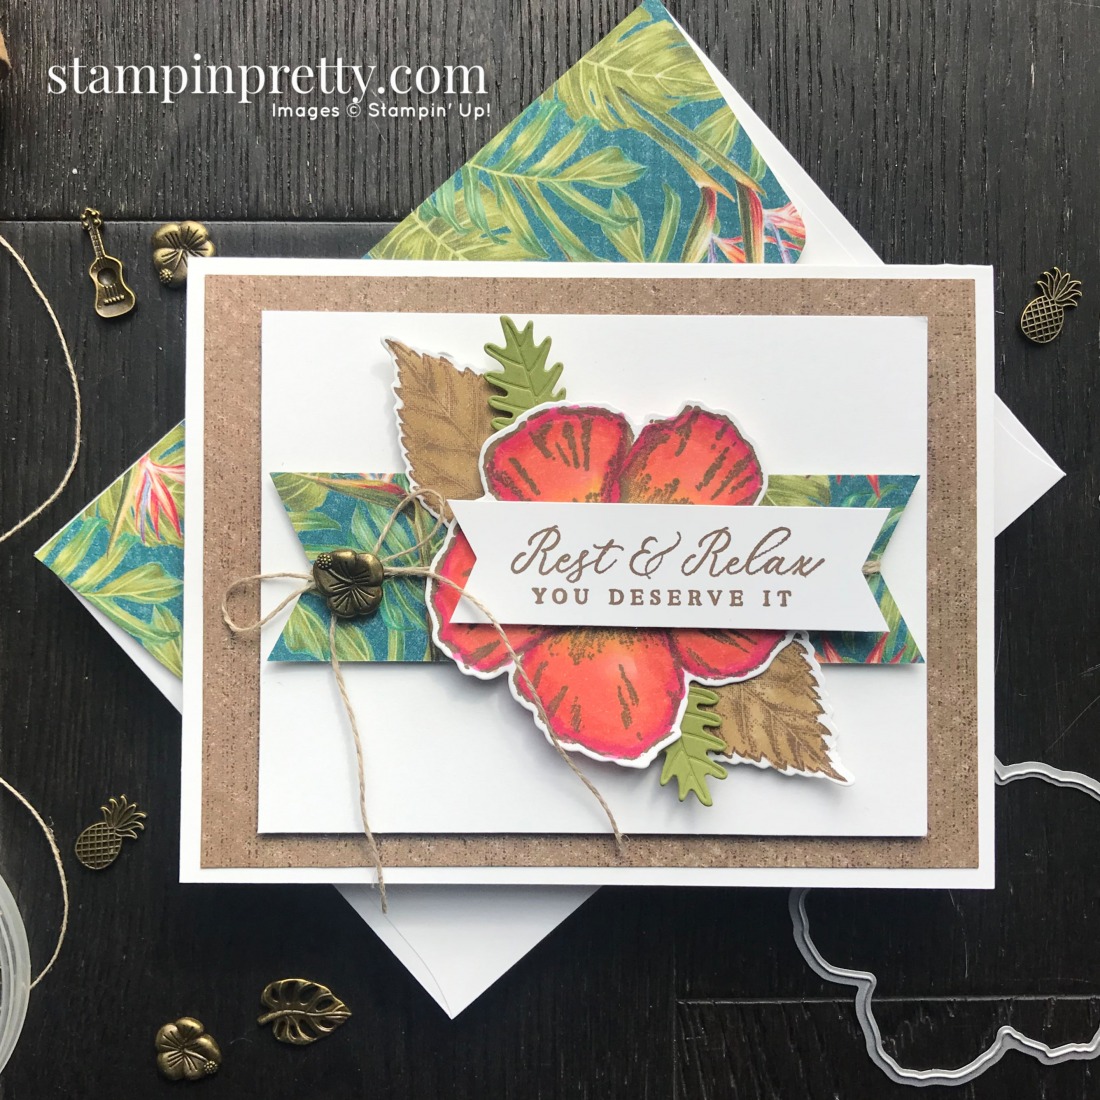 Tropical Oasis Suite from Stampin' Up! Rest & Relax Card by Mary Fish, Stampin' Pretty #sps003